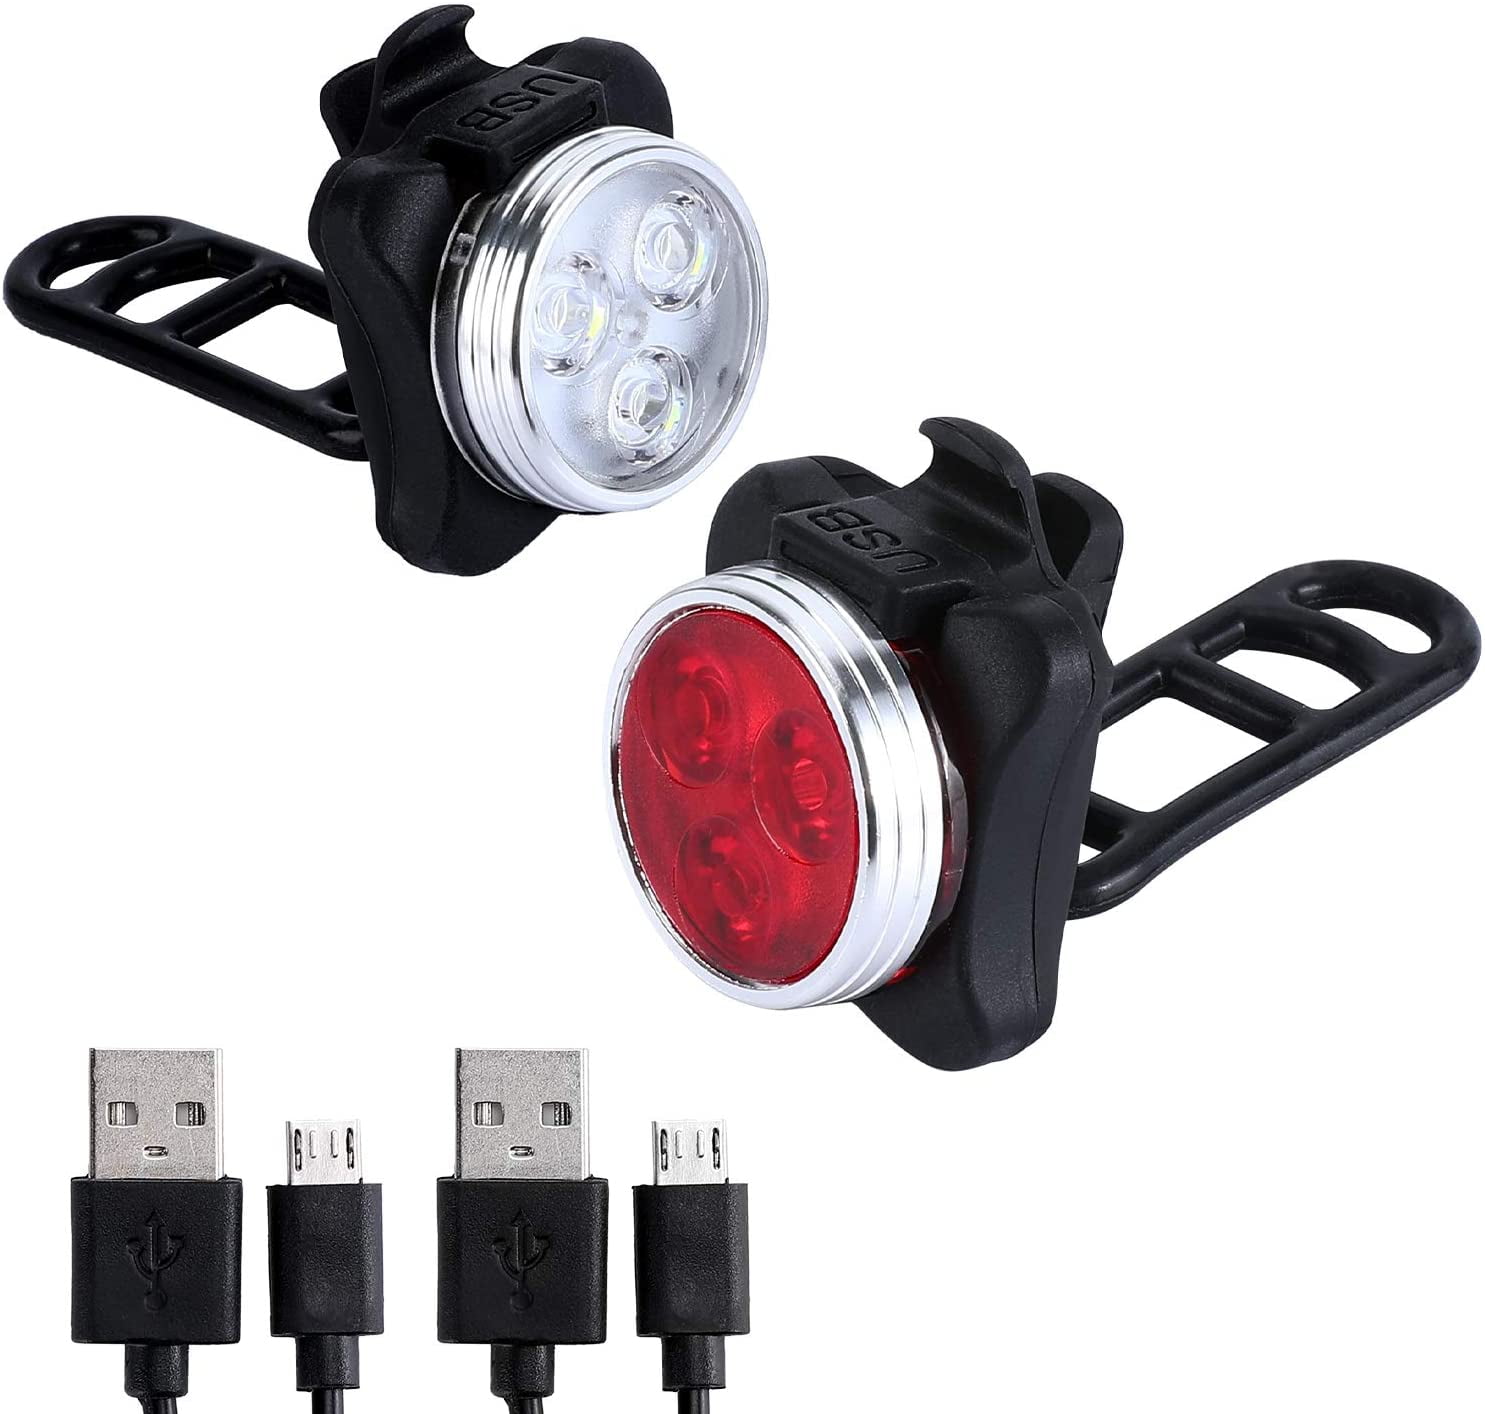 Helmet LED Bicycle Bike Lights USB Rechargeable Headlight Front Rear Tail Lamp